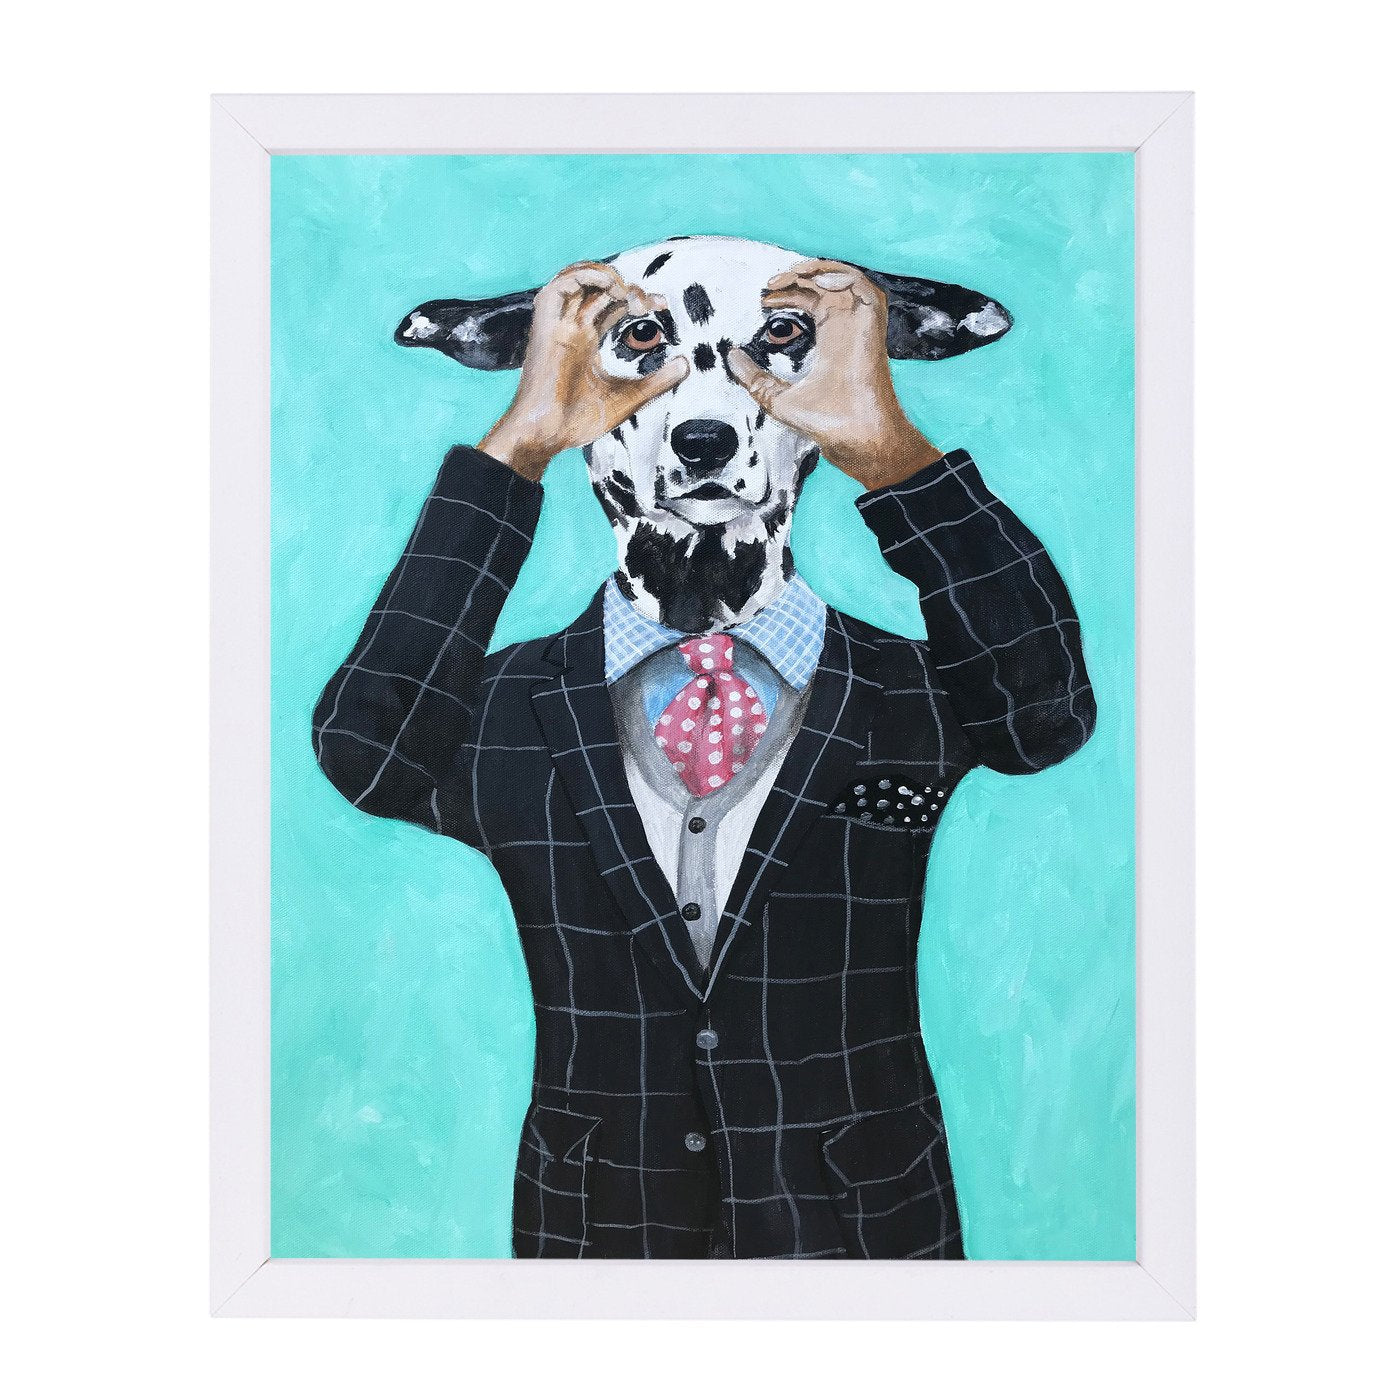 Dalmatian Is Watching You By Coco De Paris - Framed Print - Americanflat